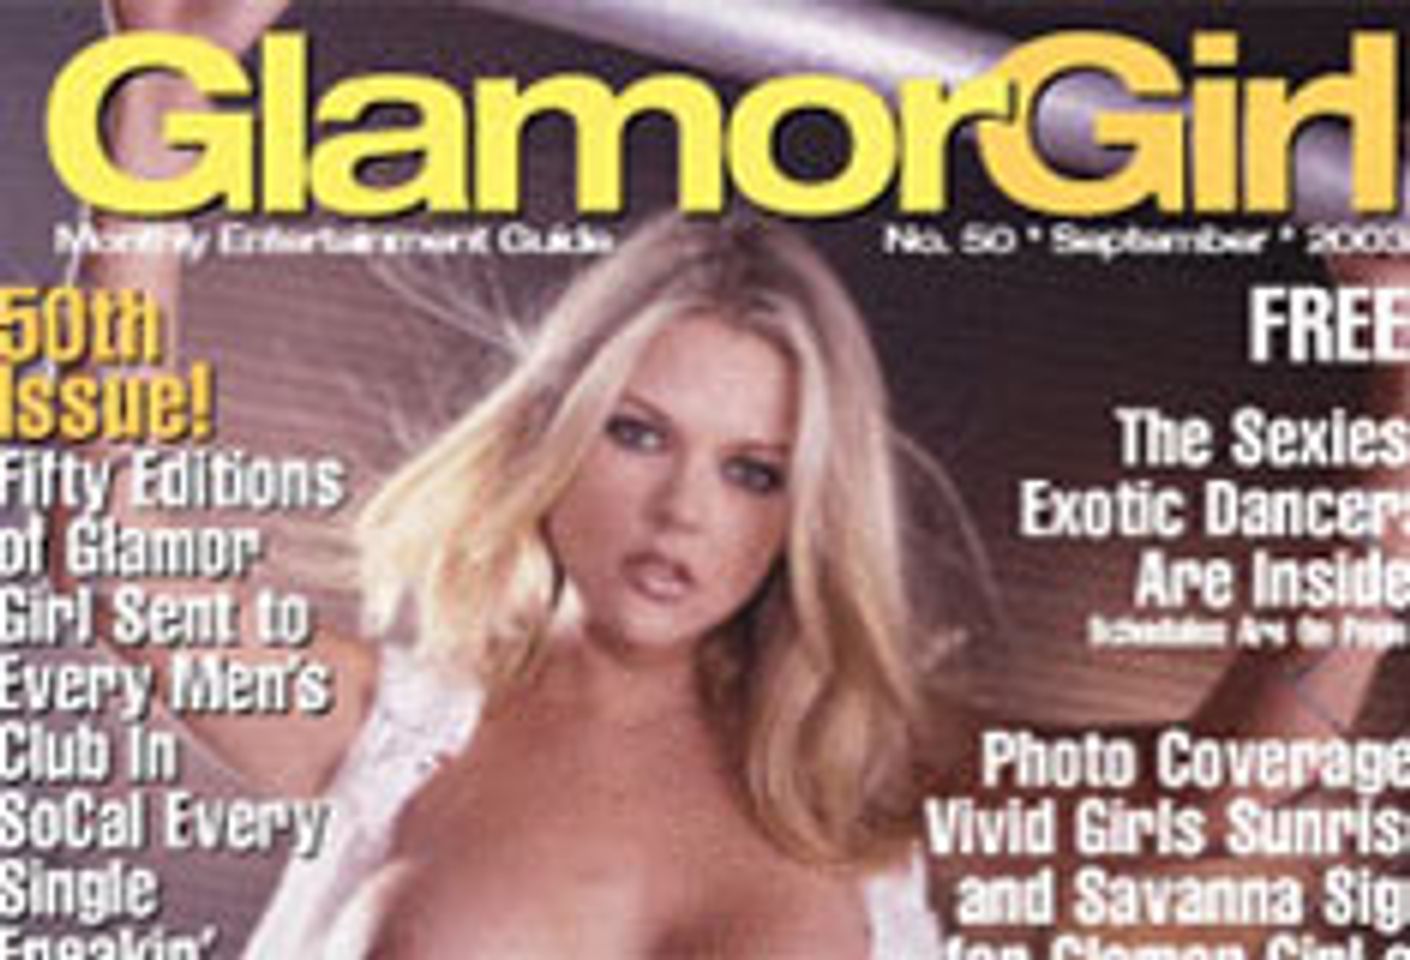 Glamor Girl Publishes Fiftieth Issue